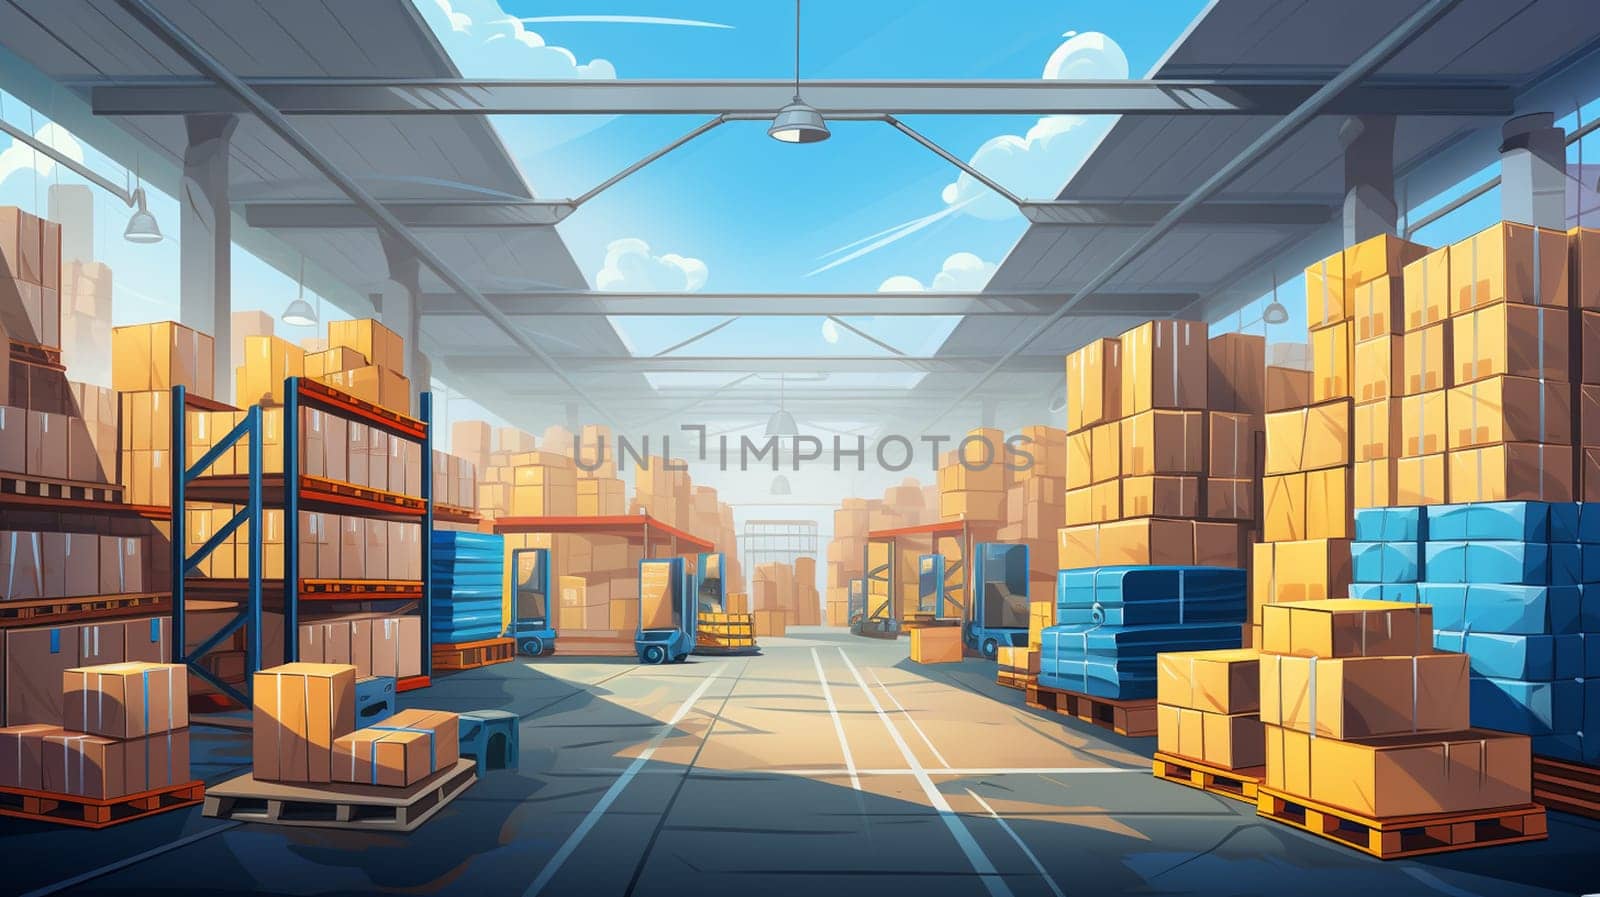 Between the Shelves of a Warehouse with Sun Shining Through the Window 3D Rendering by Andelov13